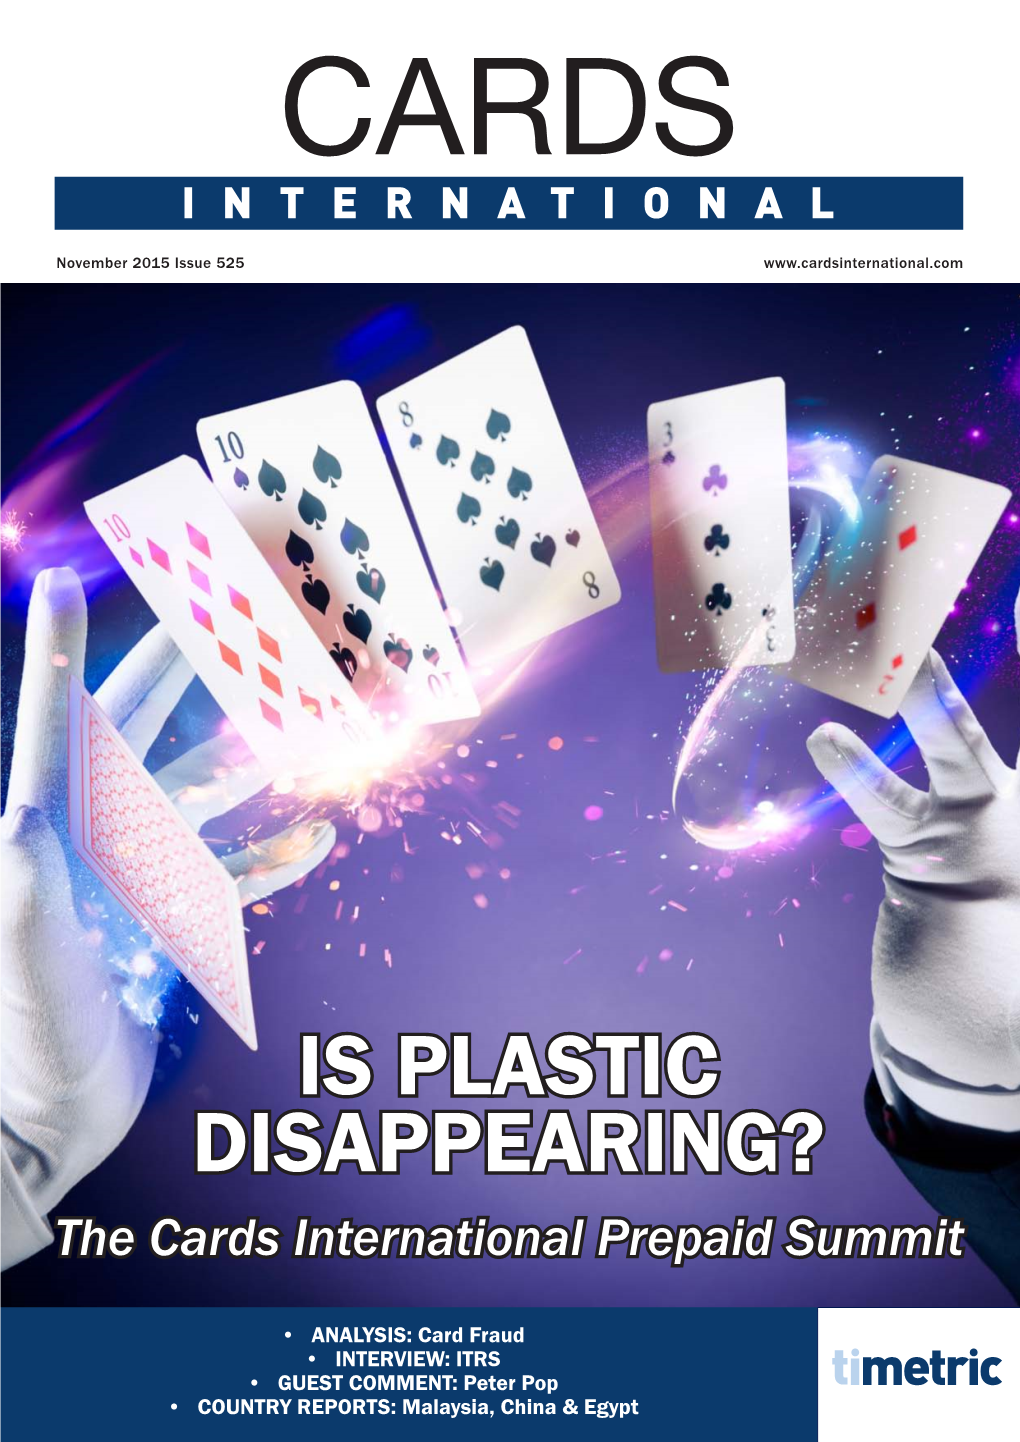 IS PLASTIC DISAPPEARING? the Cards International Prepaid Summit